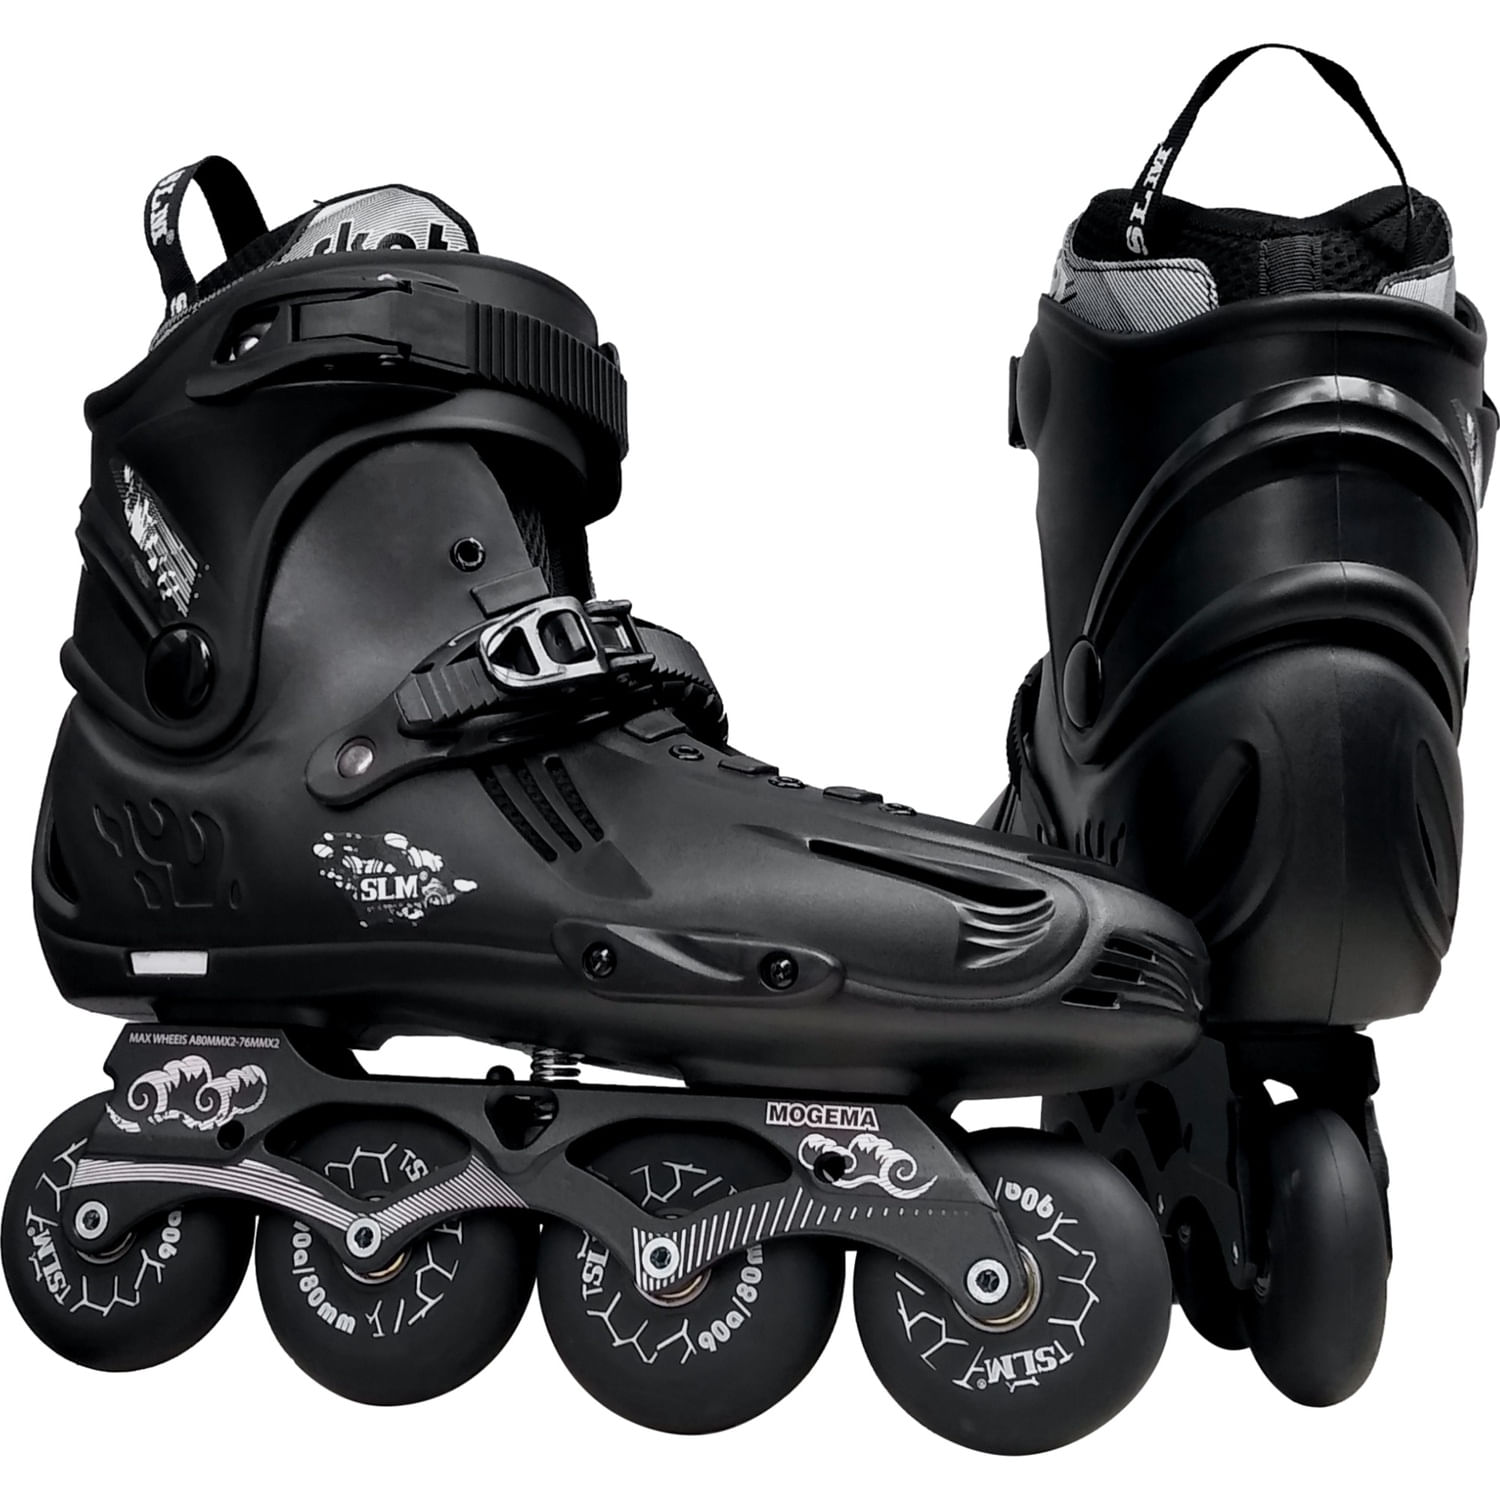 Patines Lineales T/41 SLM Freestyle Profesionales